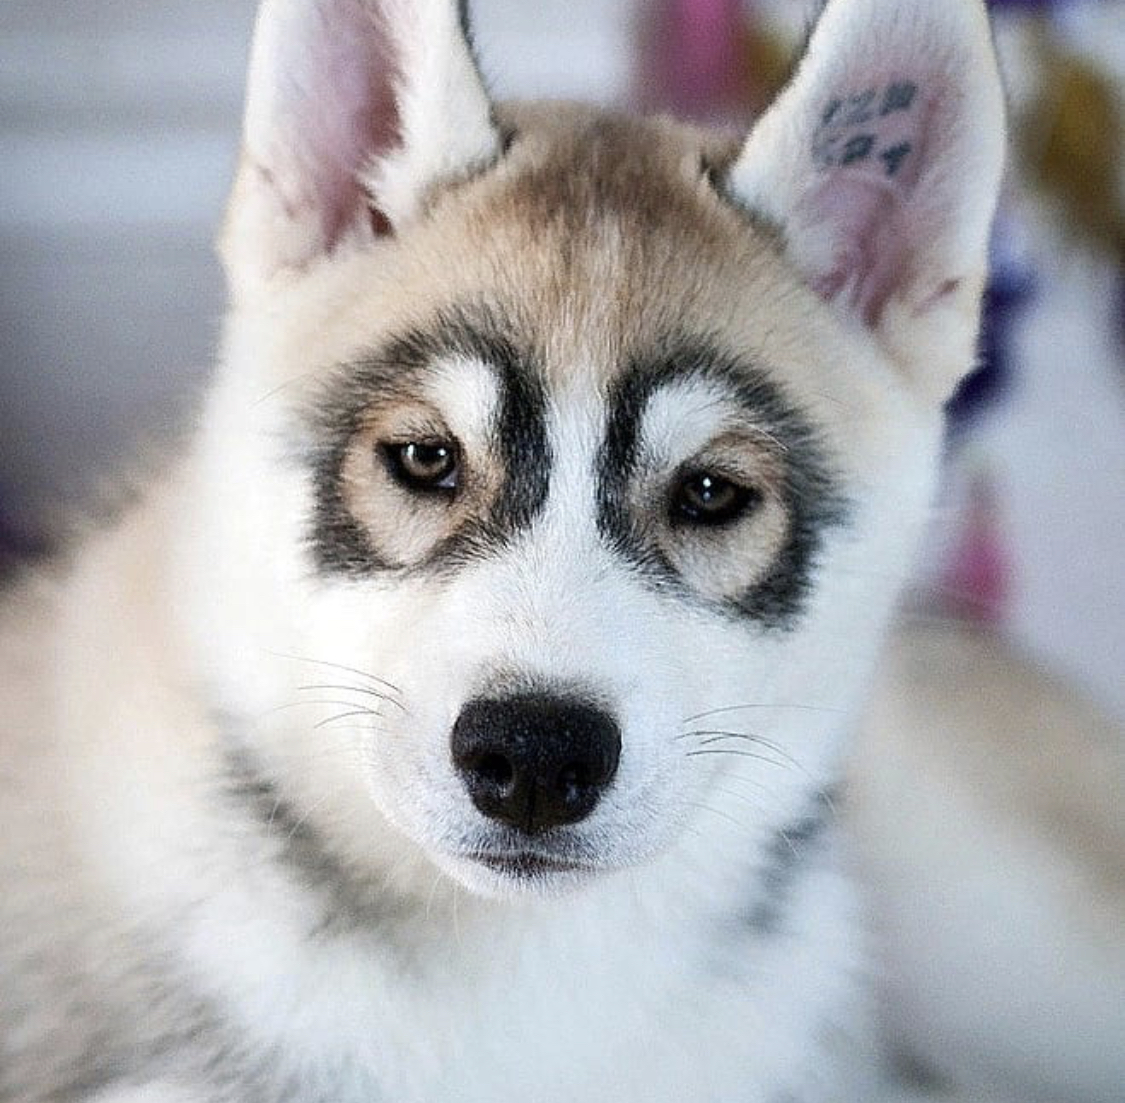 A Husky puppy with black circle around its eyes